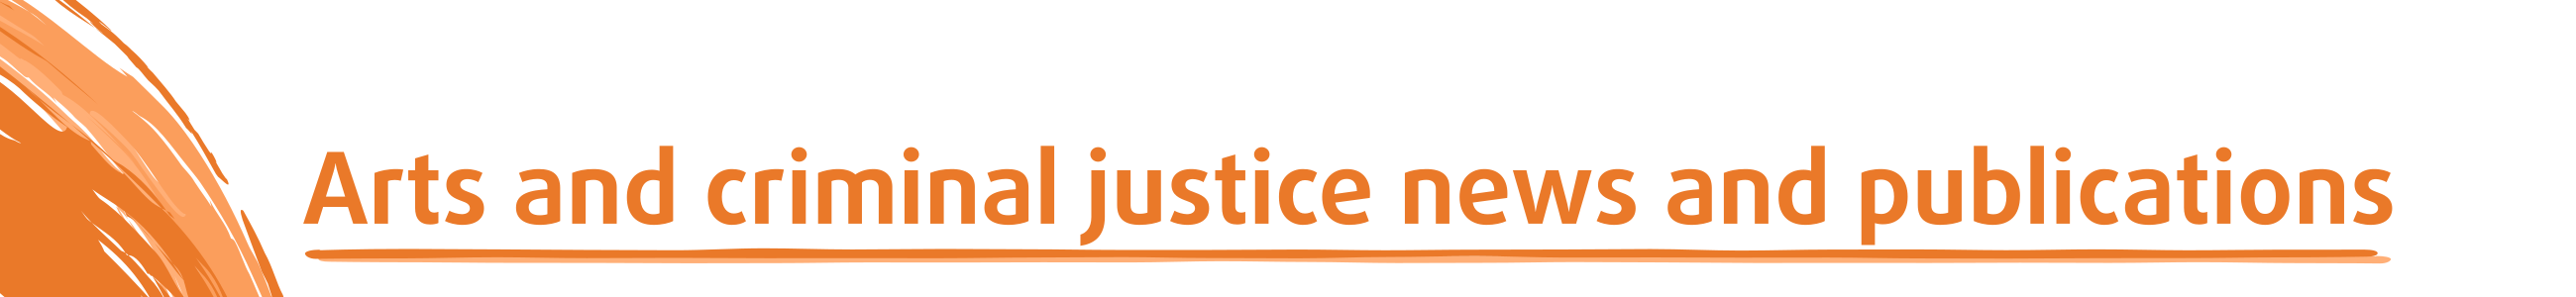 Arts and criminal justice news and publications